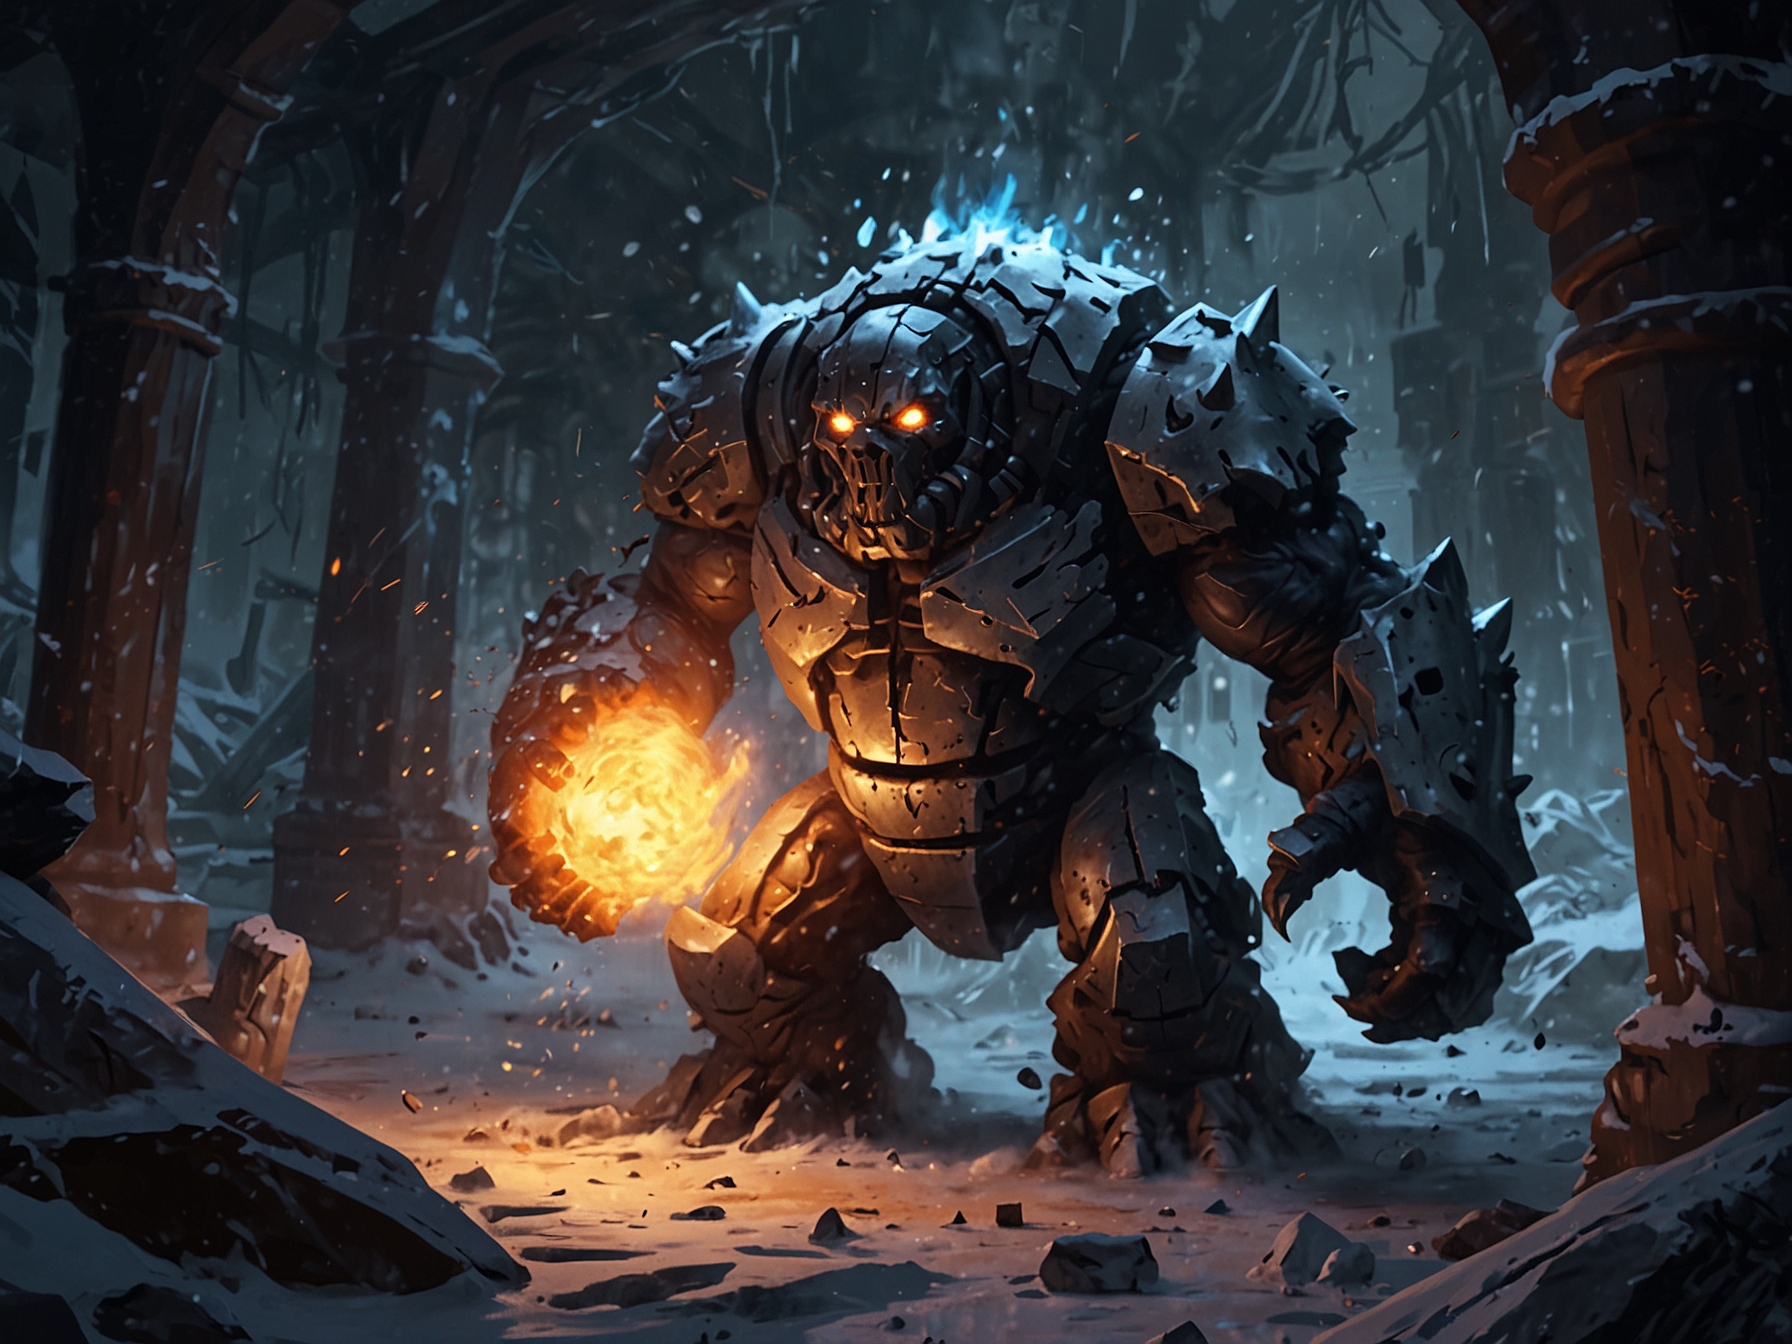 Close-up action scene of a Furnace Golem engulfed in icy effects, with the player unleashing frost attacks on its fiery core, visibly slowing and weakening the imposing enemy.